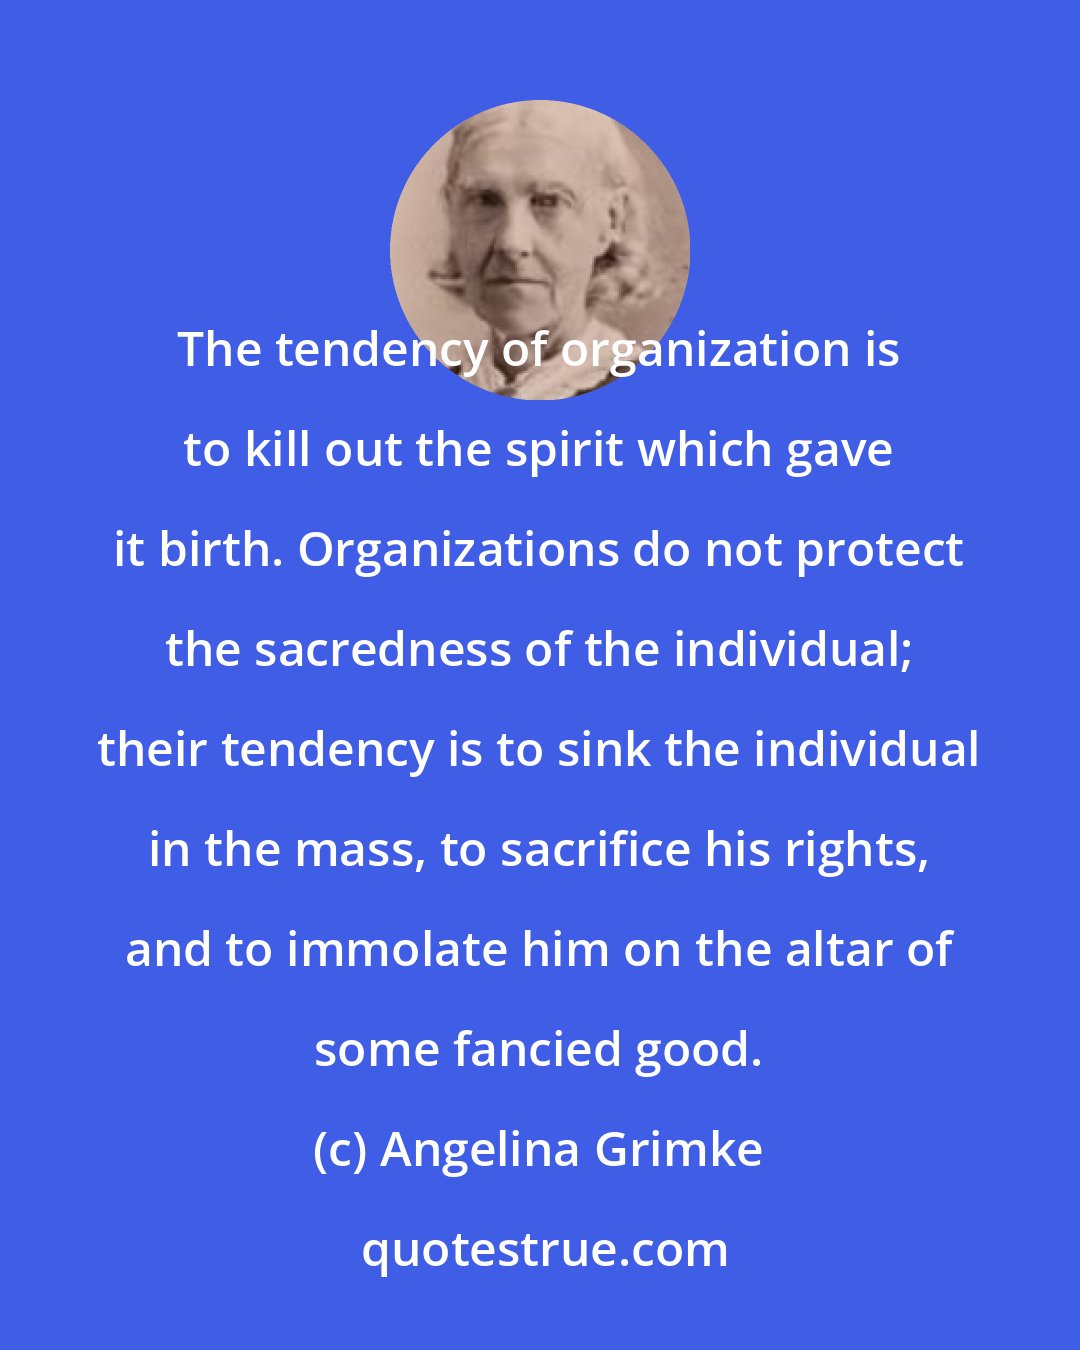 Angelina Grimke: The tendency of organization is to kill out the spirit which gave it birth. Organizations do not protect the sacredness of the individual; their tendency is to sink the individual in the mass, to sacrifice his rights, and to immolate him on the altar of some fancied good.